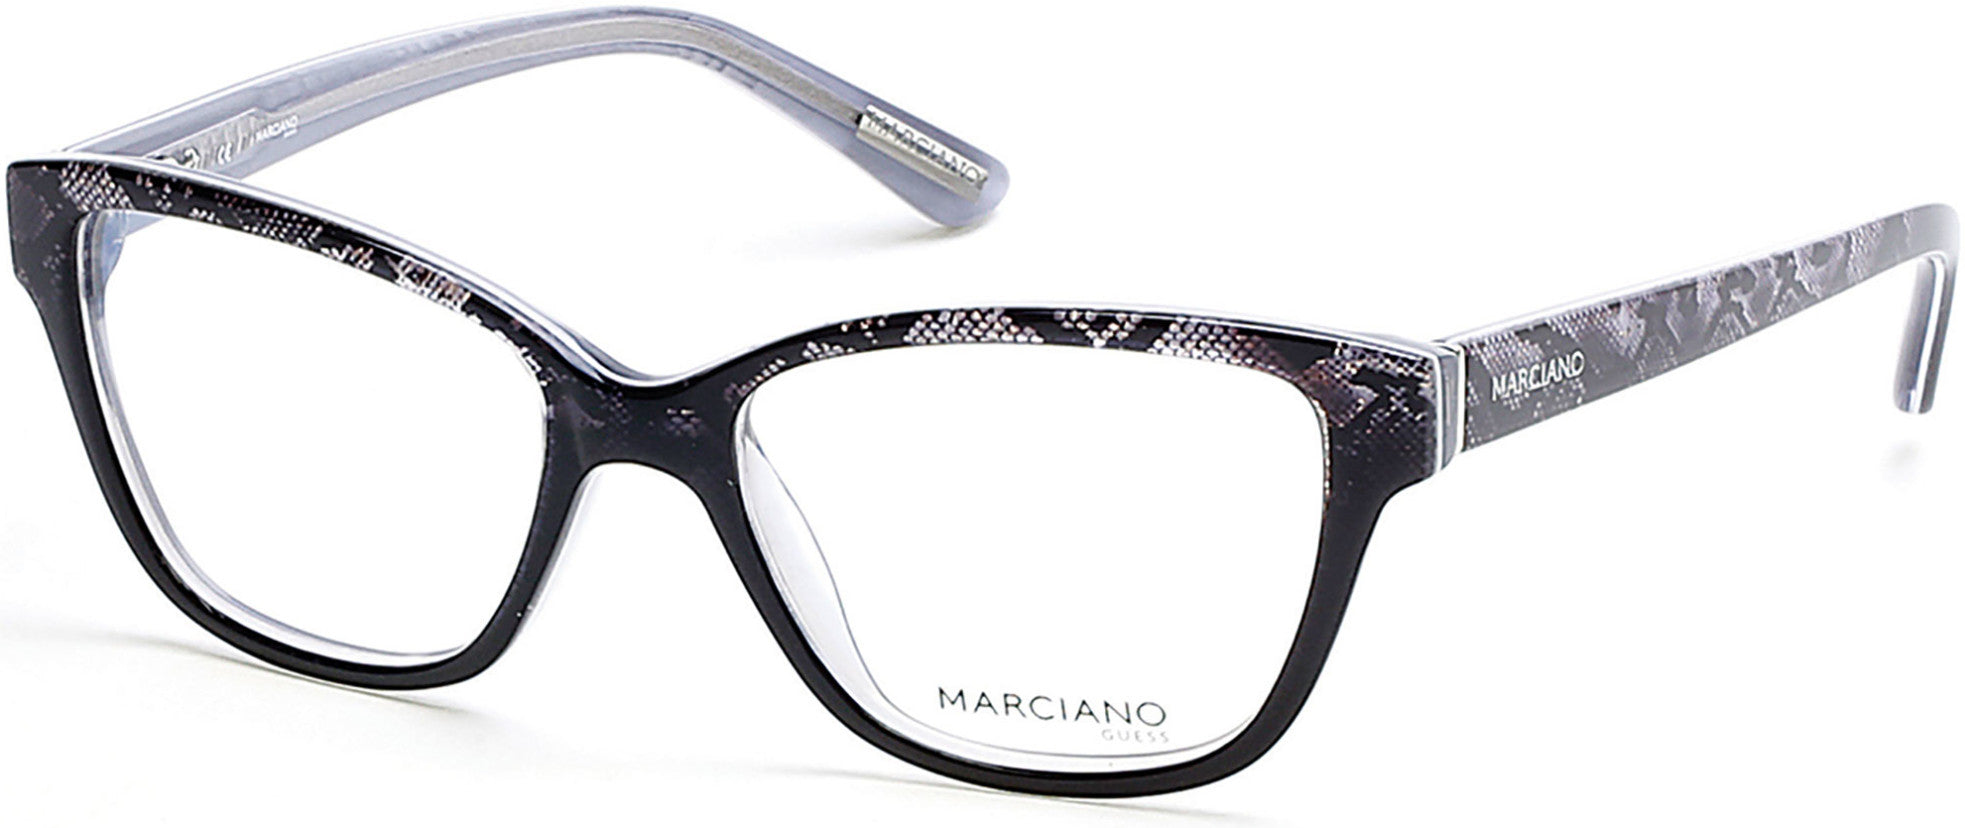 Guess By Marciano GM0280 Butterfly Eyeglasses 005-005 - Black/other